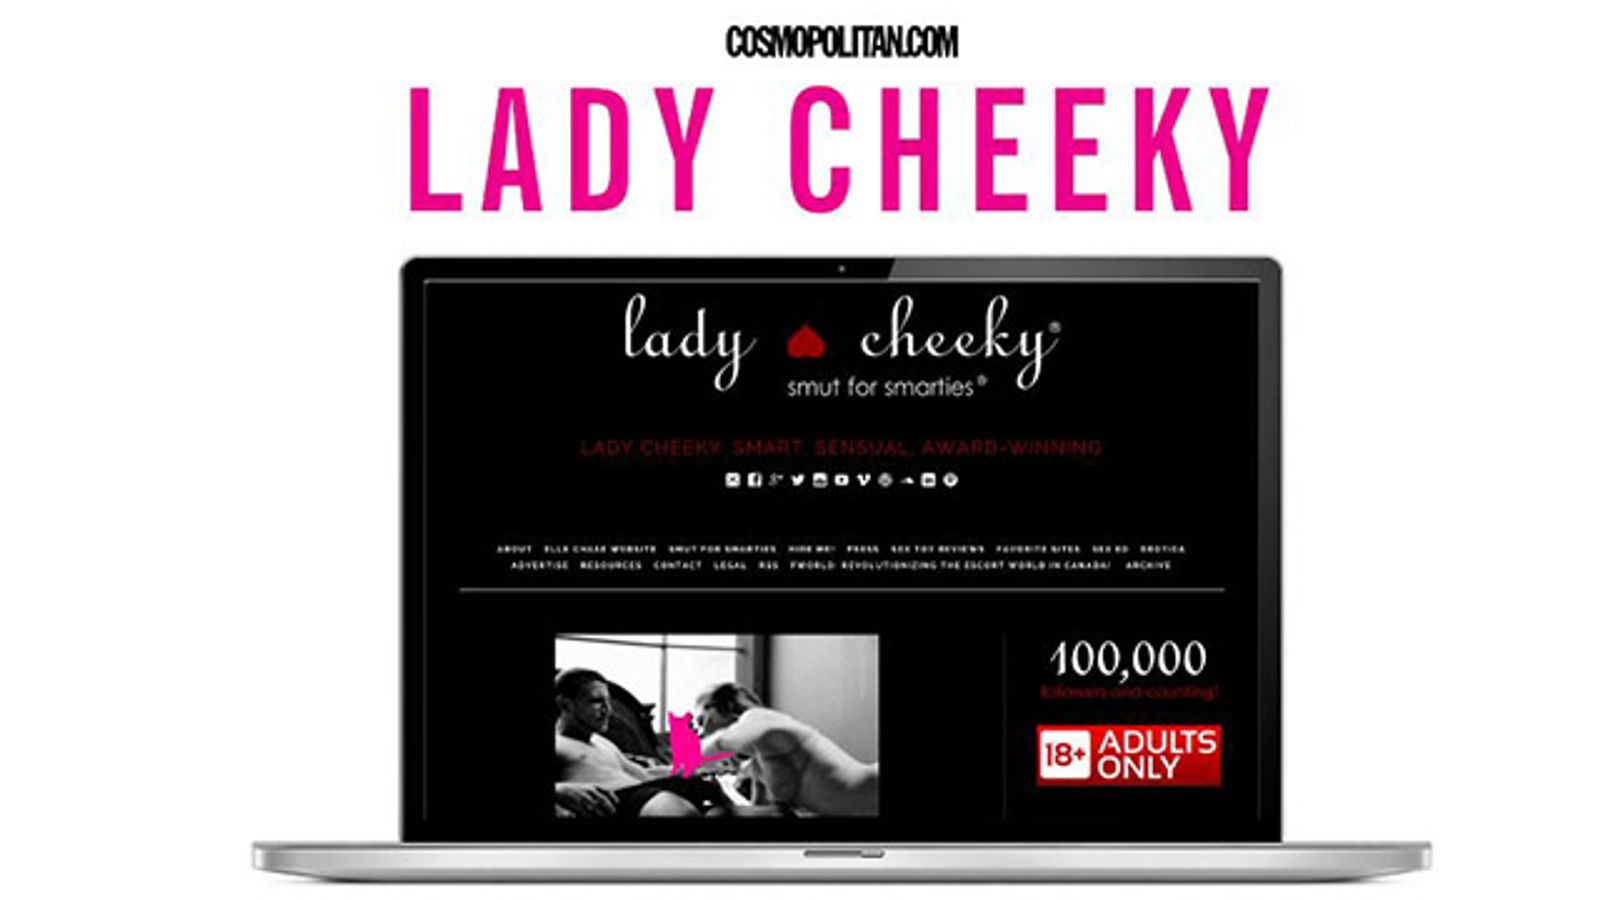 LadyCheeky.com Makes Cosmo's List of Top Porn Site for Women